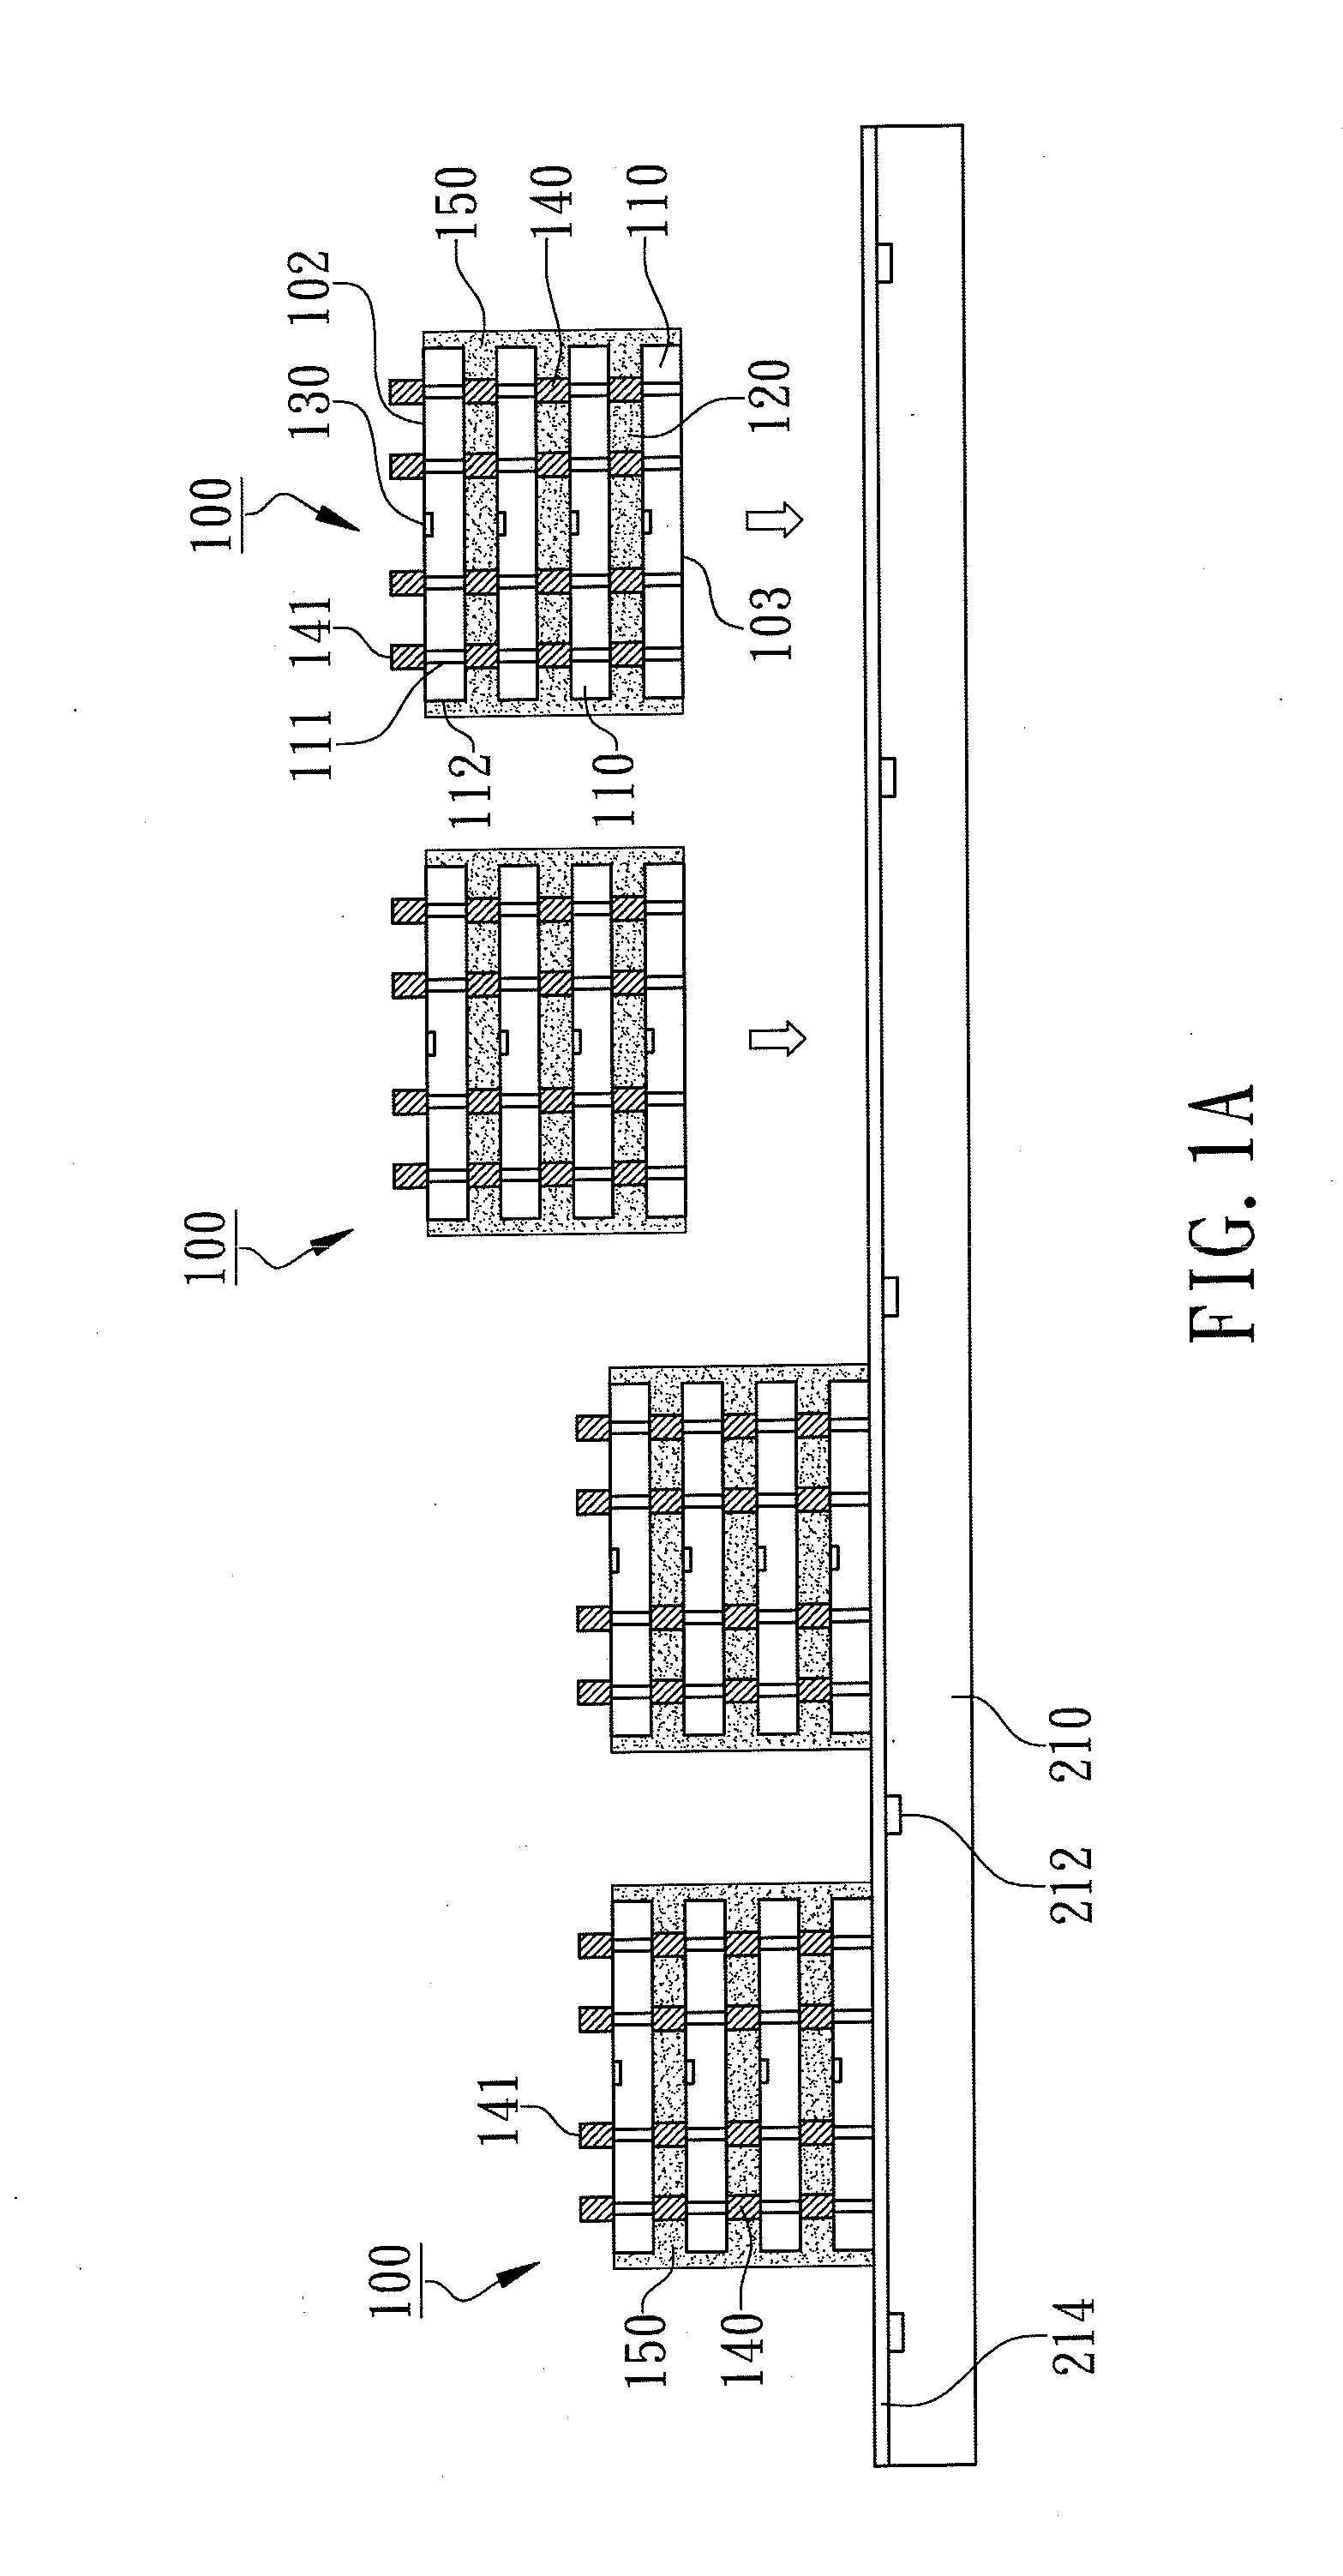 Method for wafer-level testing diced multi-chip stacked packages